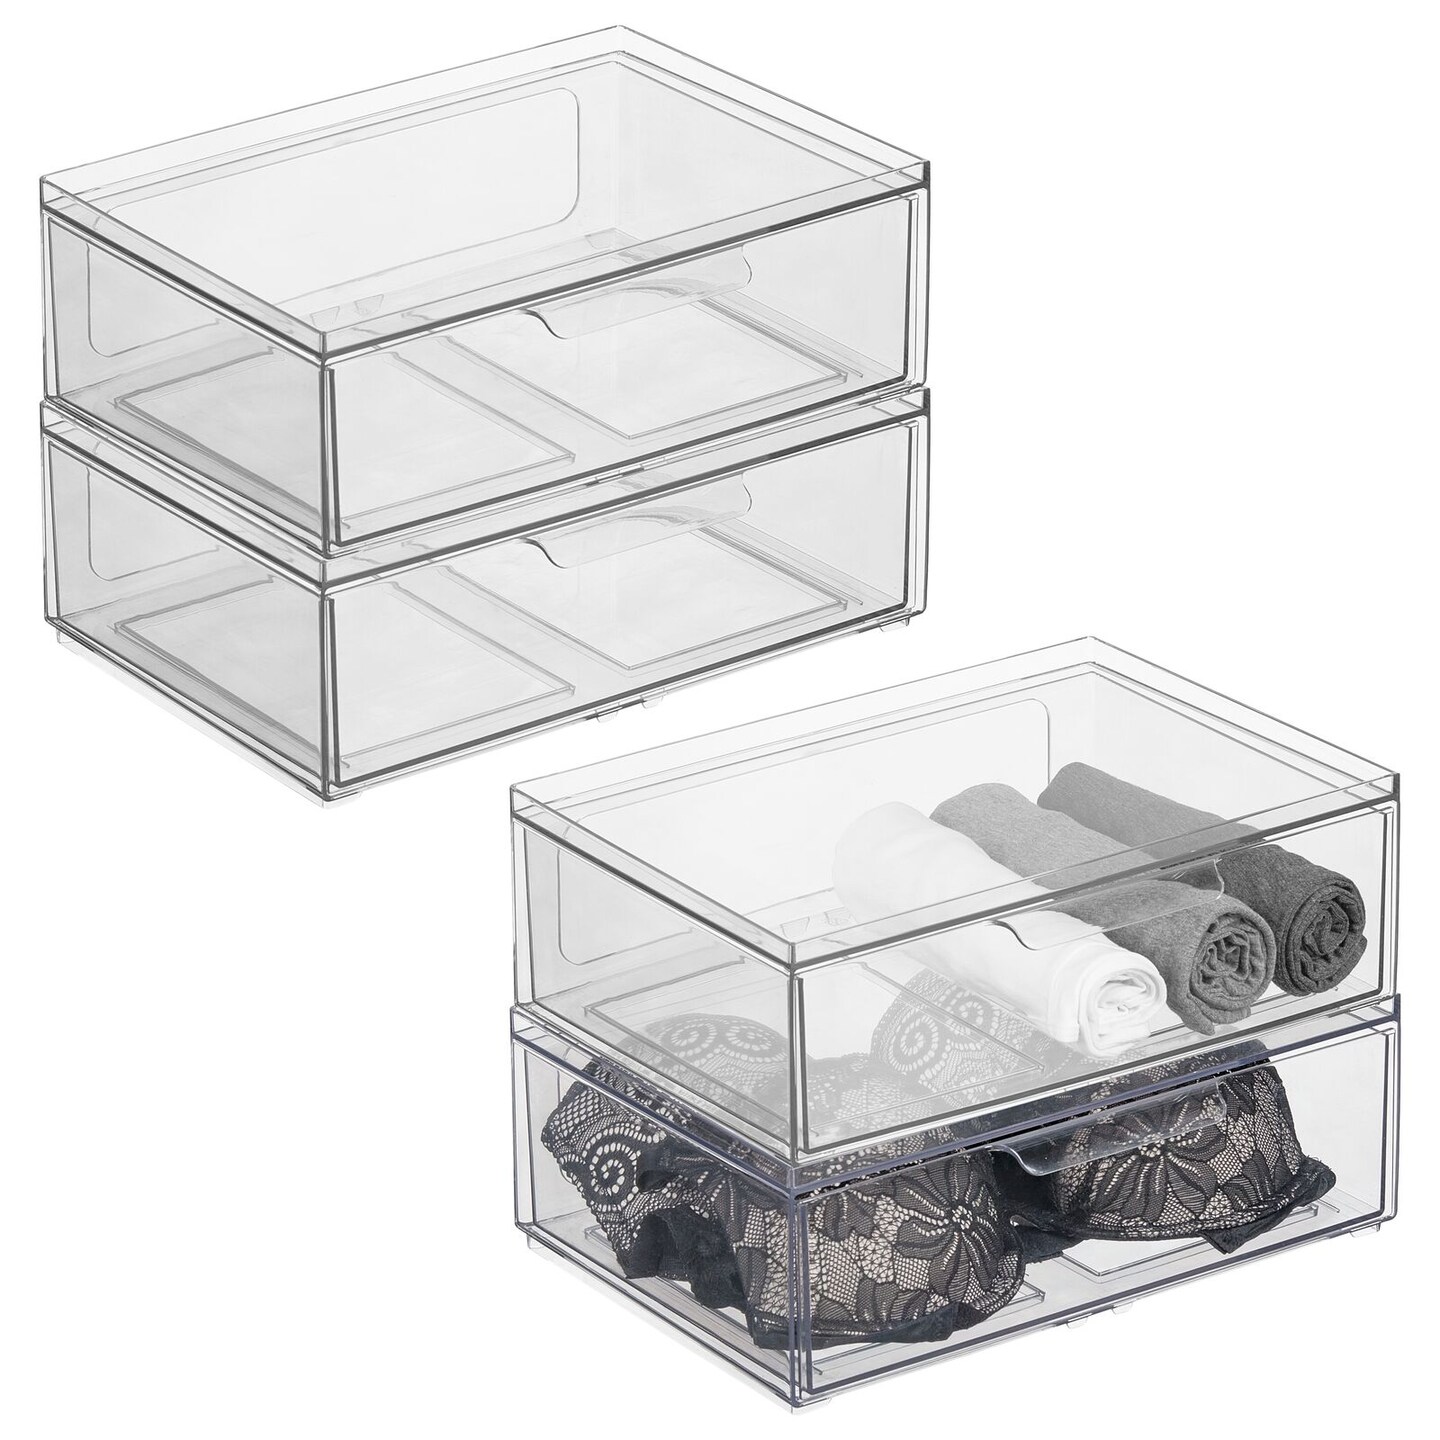 mDesign mdesign stackable storage containers box with pull-out